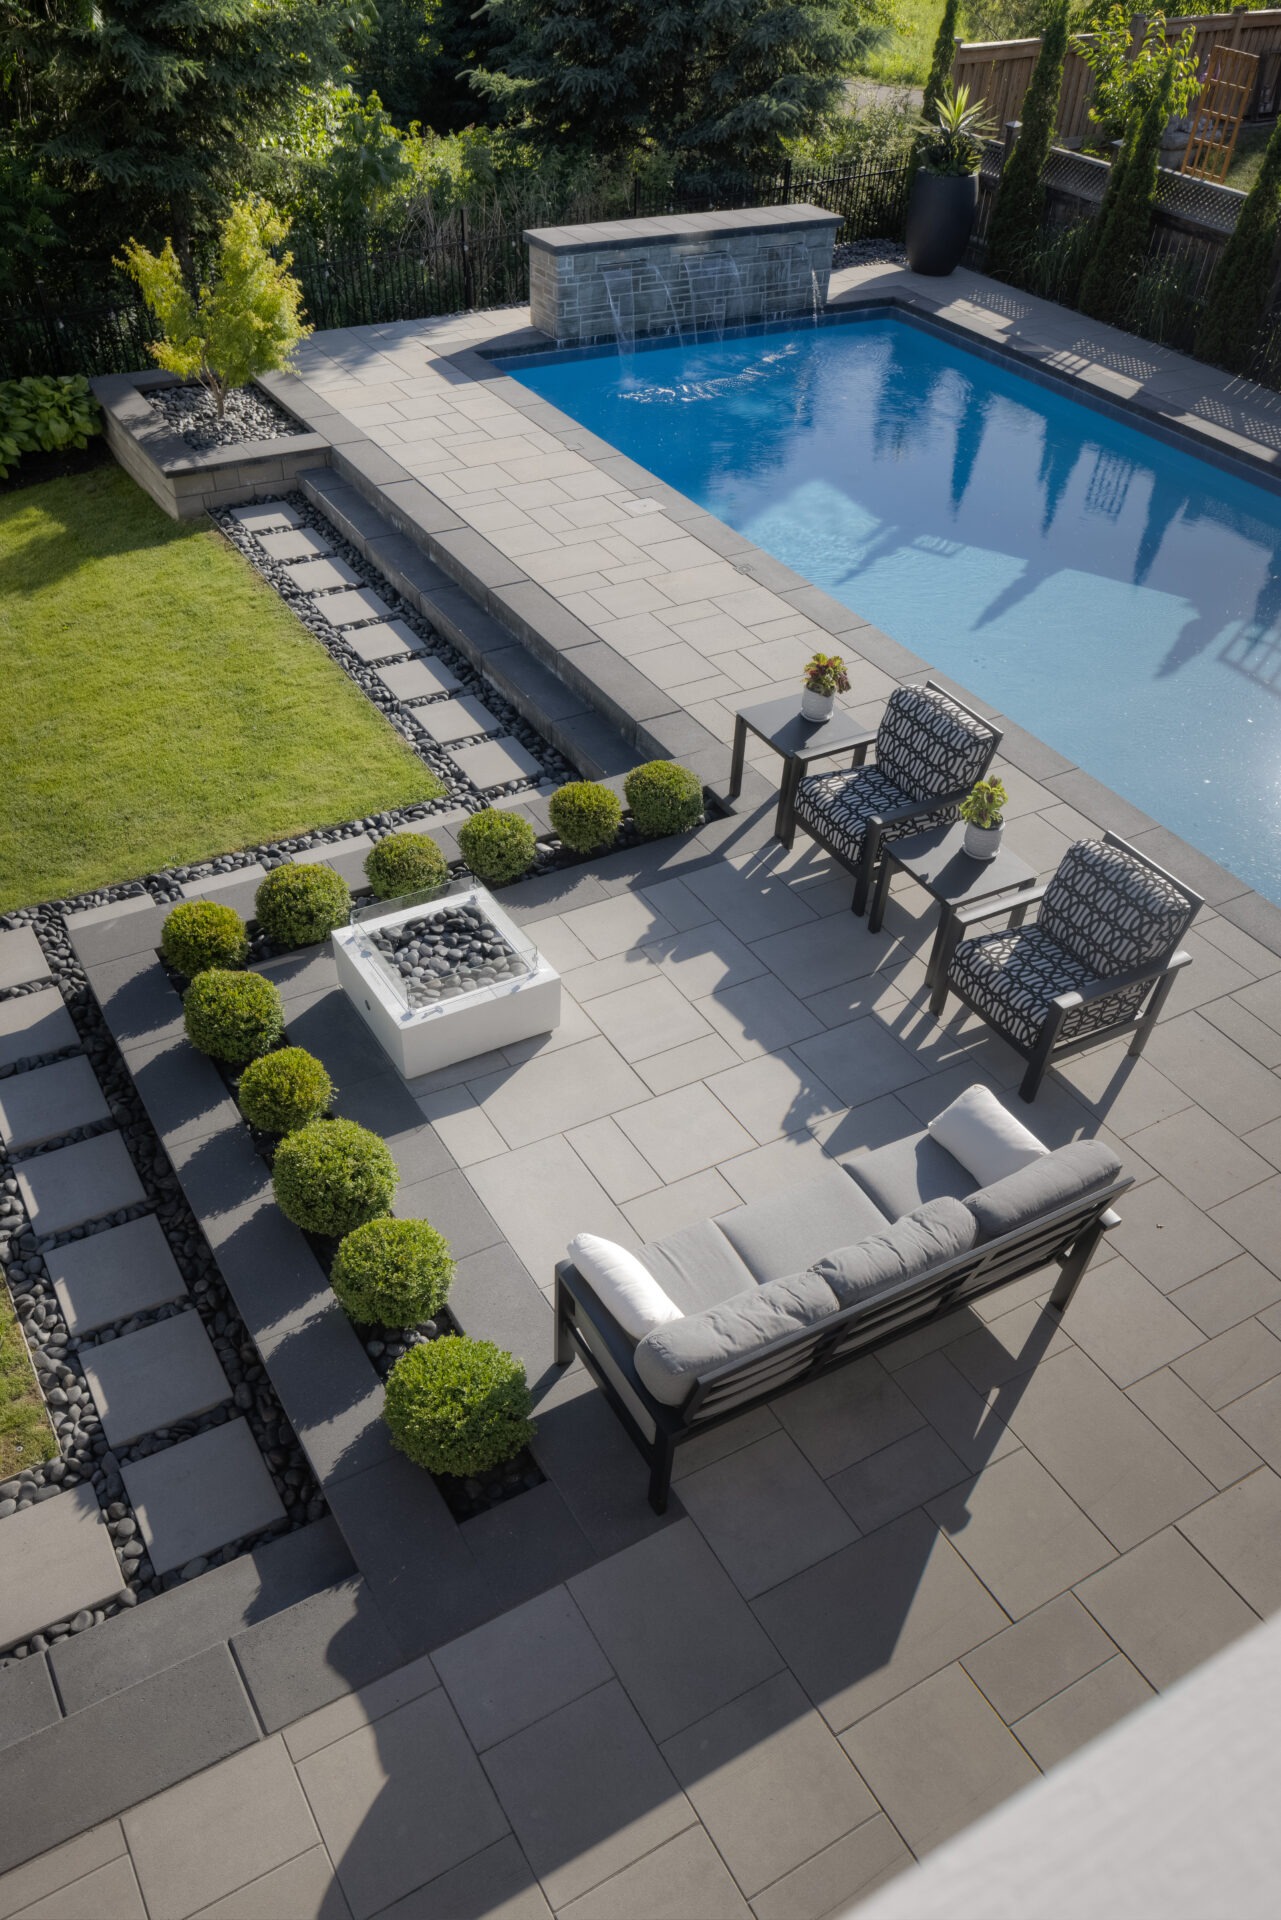 An outdoor area featuring a swimming pool, patio with lounging furniture, neatly arranged shrubbery, a water feature, and a well-maintained lawn.